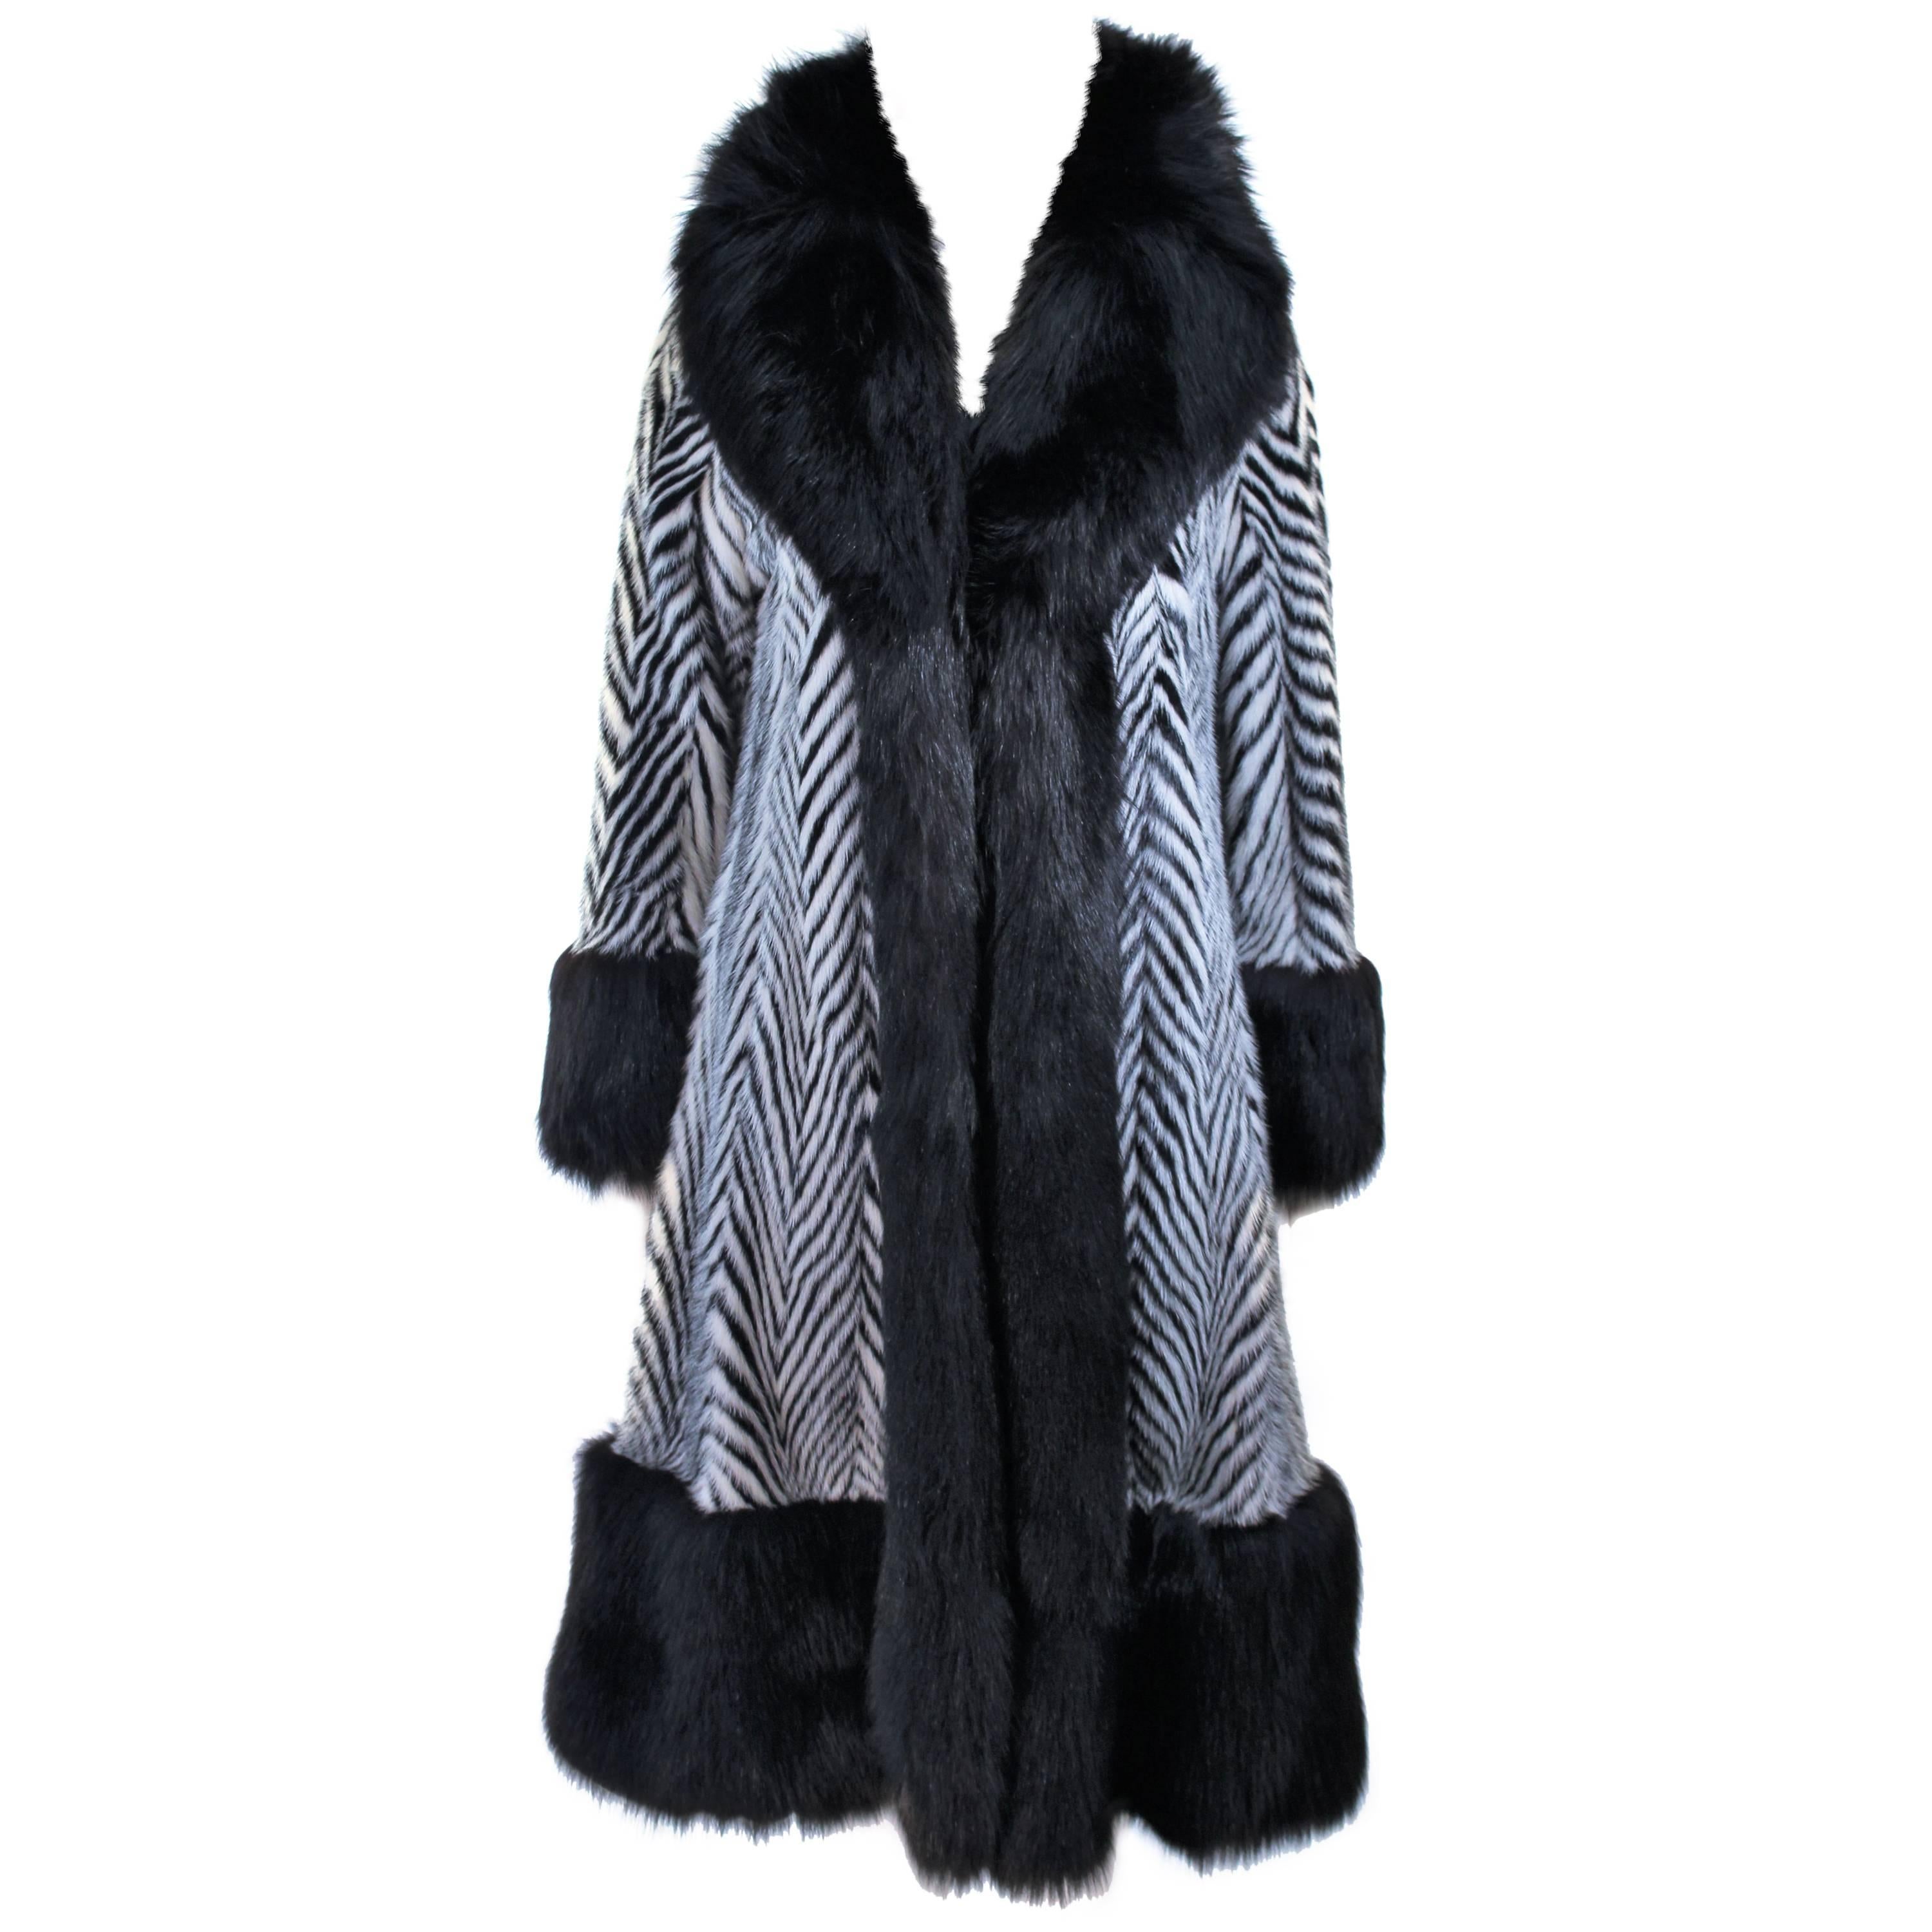 ZACCARIA FURS Black and White Mink Chevron Fur Coat with Fox Trim Size 6-8 For Sale